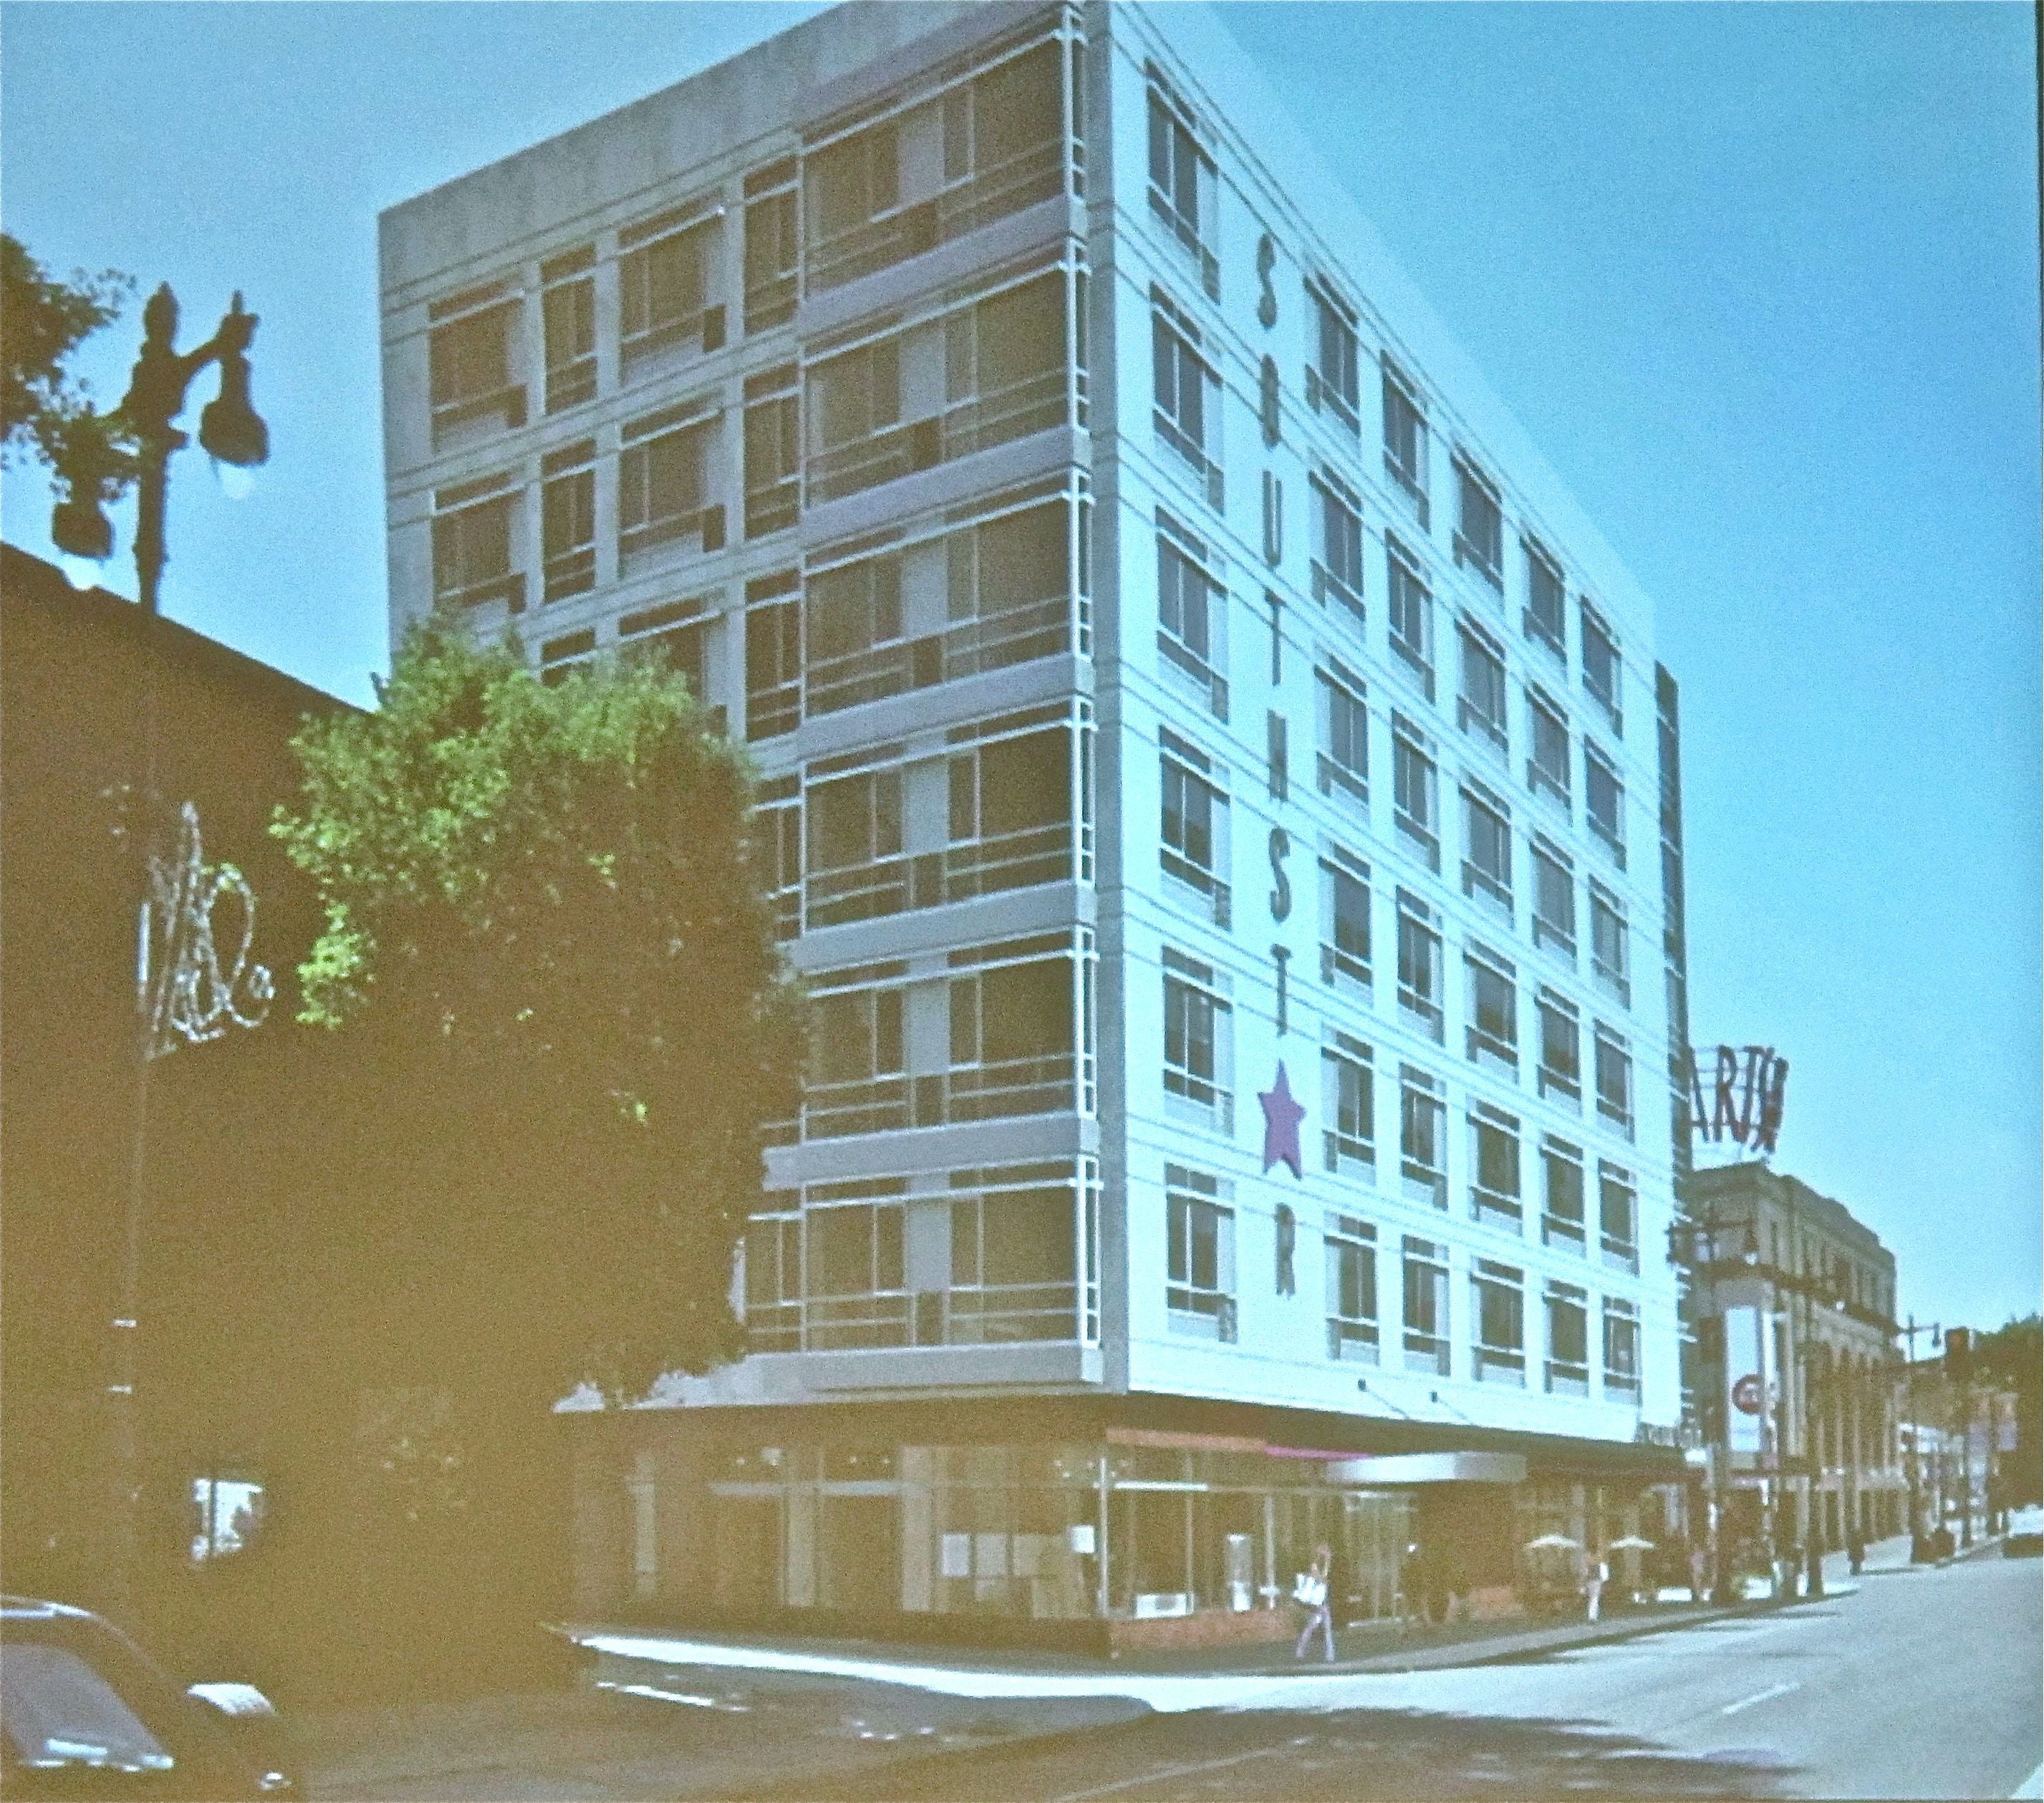 Plan for an 80-unit, transit-oriented development at 521-31 S. Broad gets planning commission approval